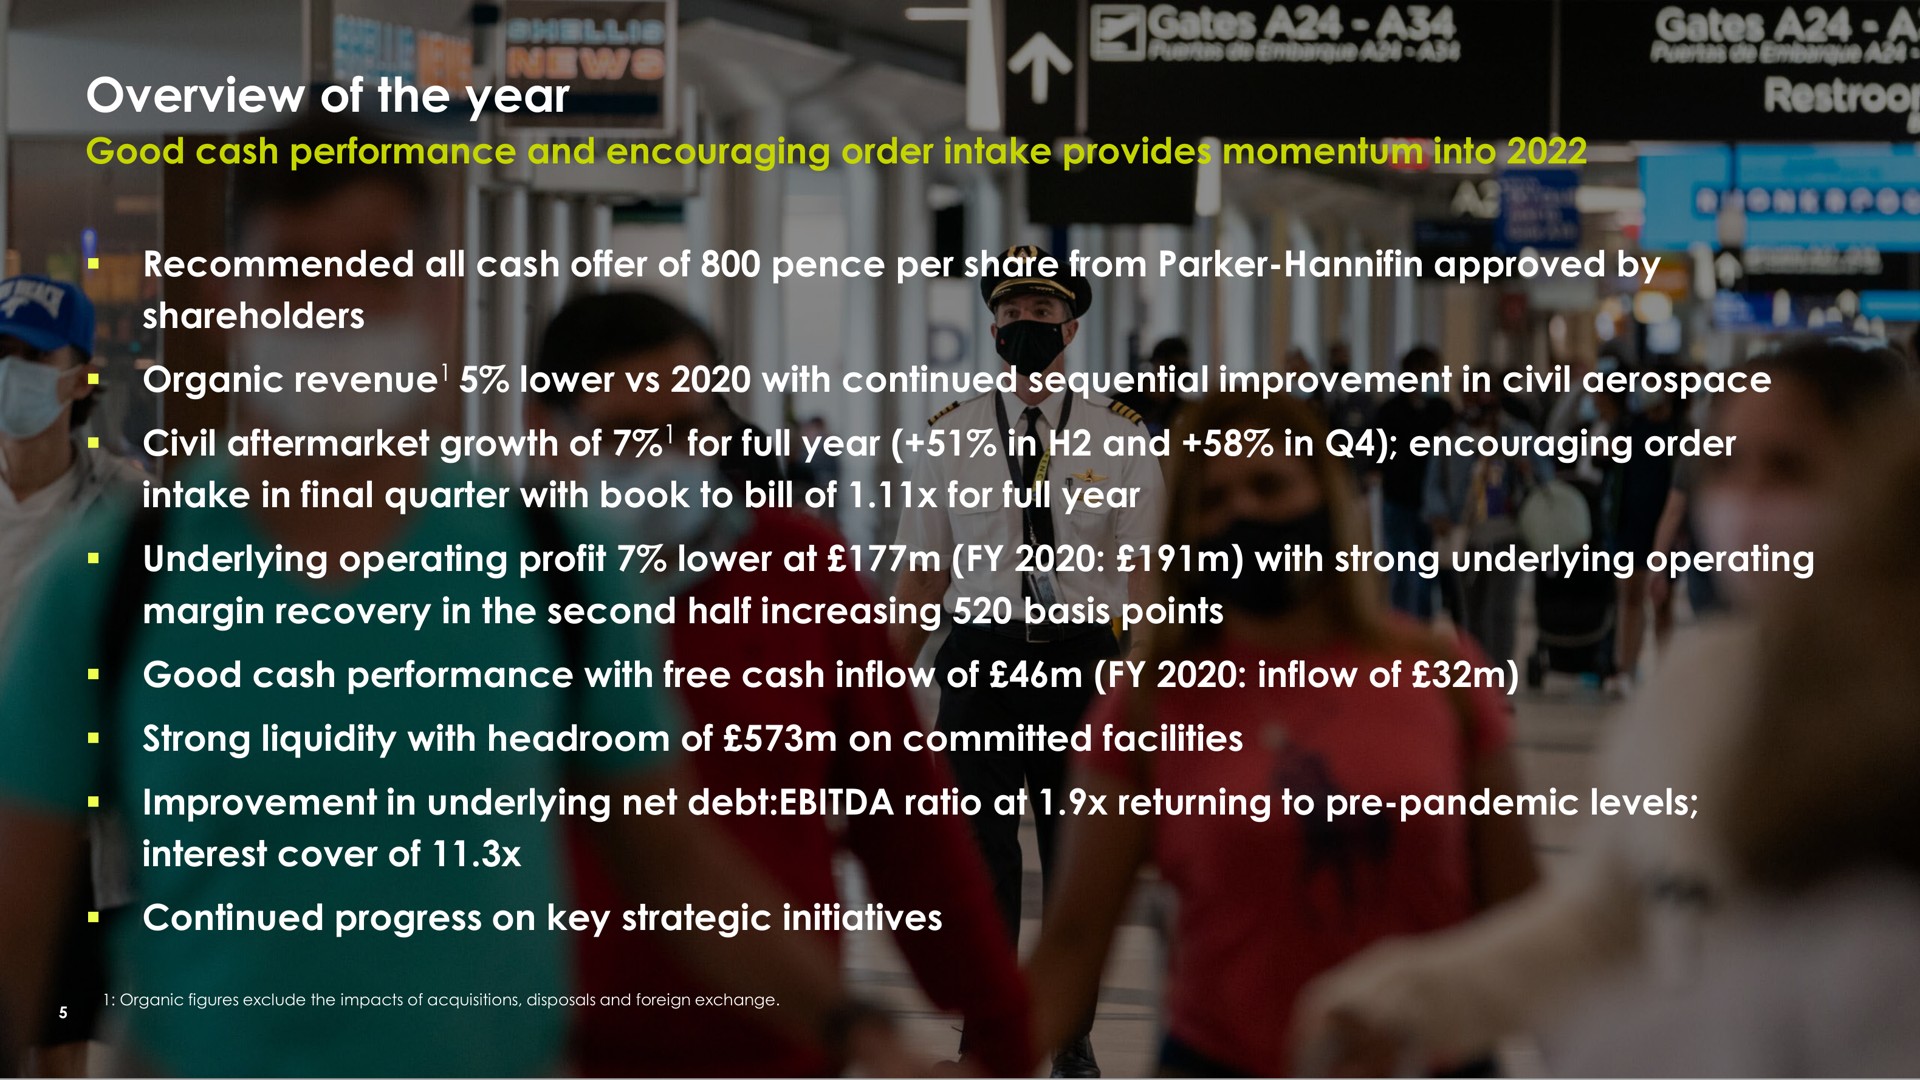 overview of the year good cash performance and encouraging order intake provides momentum into recommended all cash offer of pence per share from parker approved by shareholders organic revenue lower with continued sequential improvement in civil civil growth of for full year in and in encouraging order intake in final quarter with book to bill of for full year underlying operating profit lower at with strong underlying operating margin recovery in the second half increasing basis points good cash performance with free cash inflow of inflow of strong liquidity with headroom of on committed facilities improvement in underlying net debt ratio at returning to pandemic levels interest cover of continued progress on key strategic initiatives | Meggitt